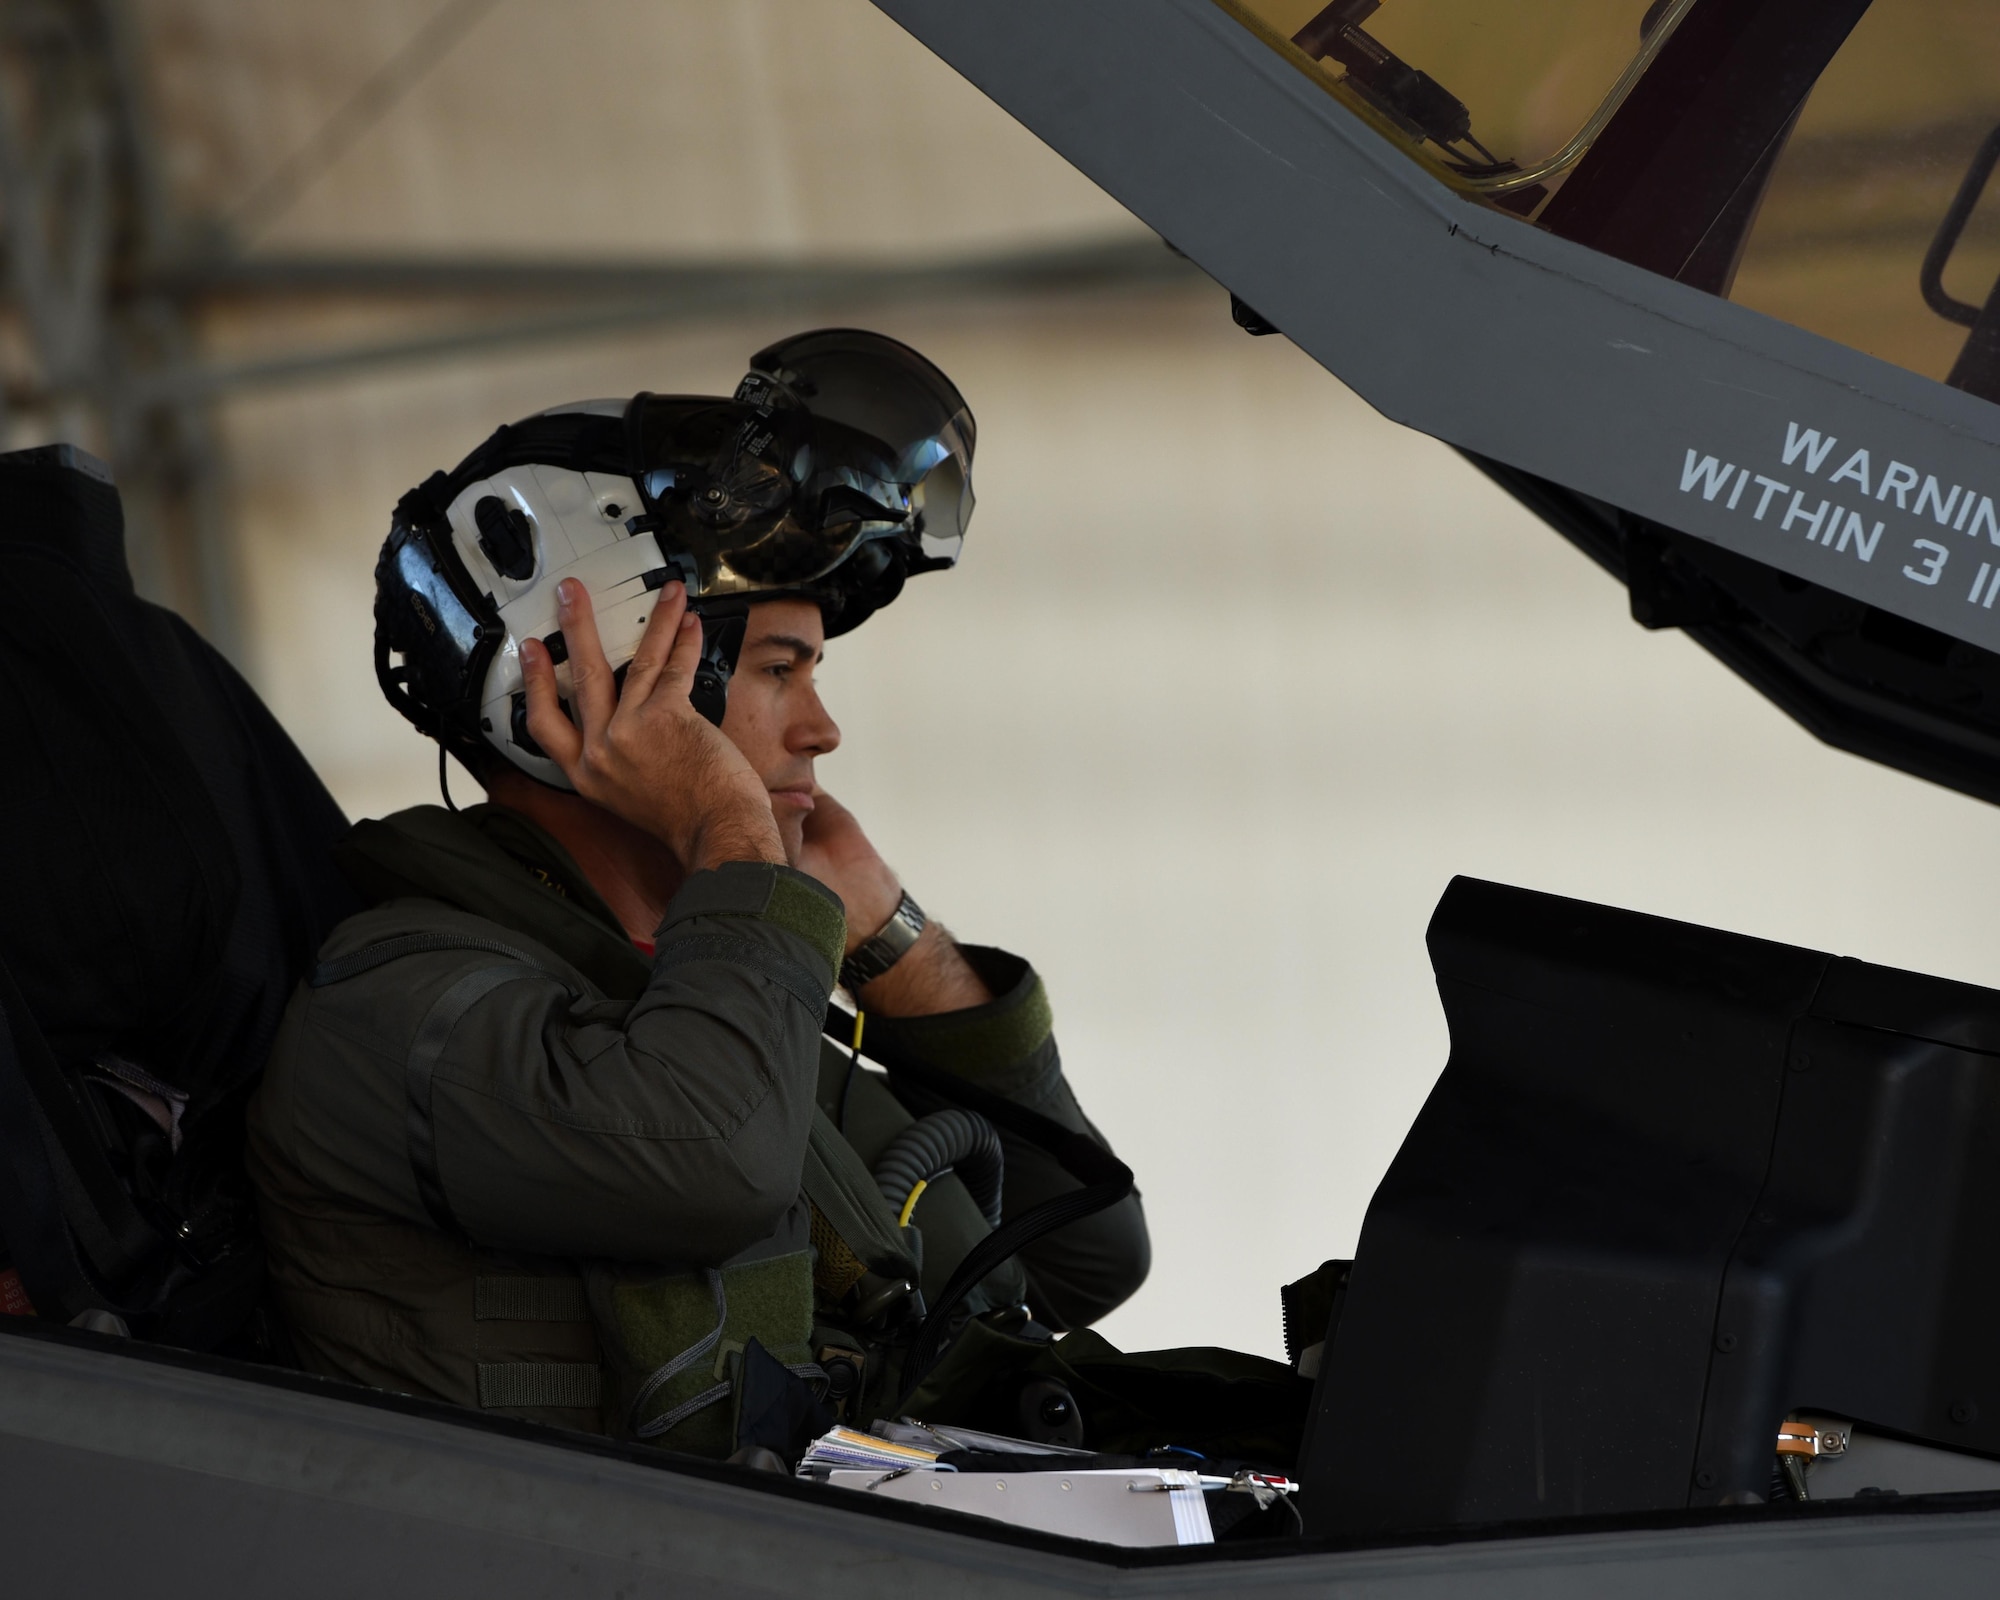 U.S. Navy Lt. Cmdr. Charles Escher, Strike Fighter Squadron (VFA-101) operations officer, dawns his helmet prior to flying an Air Force F-35A Dec. 6, 2016, at Eglin Air Force Base, Florida. For only the second time at Eglin AFB, a Naval Aviator has been selected to dual qualify in the U.S. Navy’s F-35C and the Air Force’s F-35A. Escher plans to use what he learns from his experience with the 33 FW to help the F-35 enterprise grow. He looks to join a group of test pilots at Edwards AFB, California, where he will have the opportunity to be the Navy’s voice for the aircraft weapons and vehicle system development. (U.S. Air Force photo/ Staff Sgt. Peter Thompson)